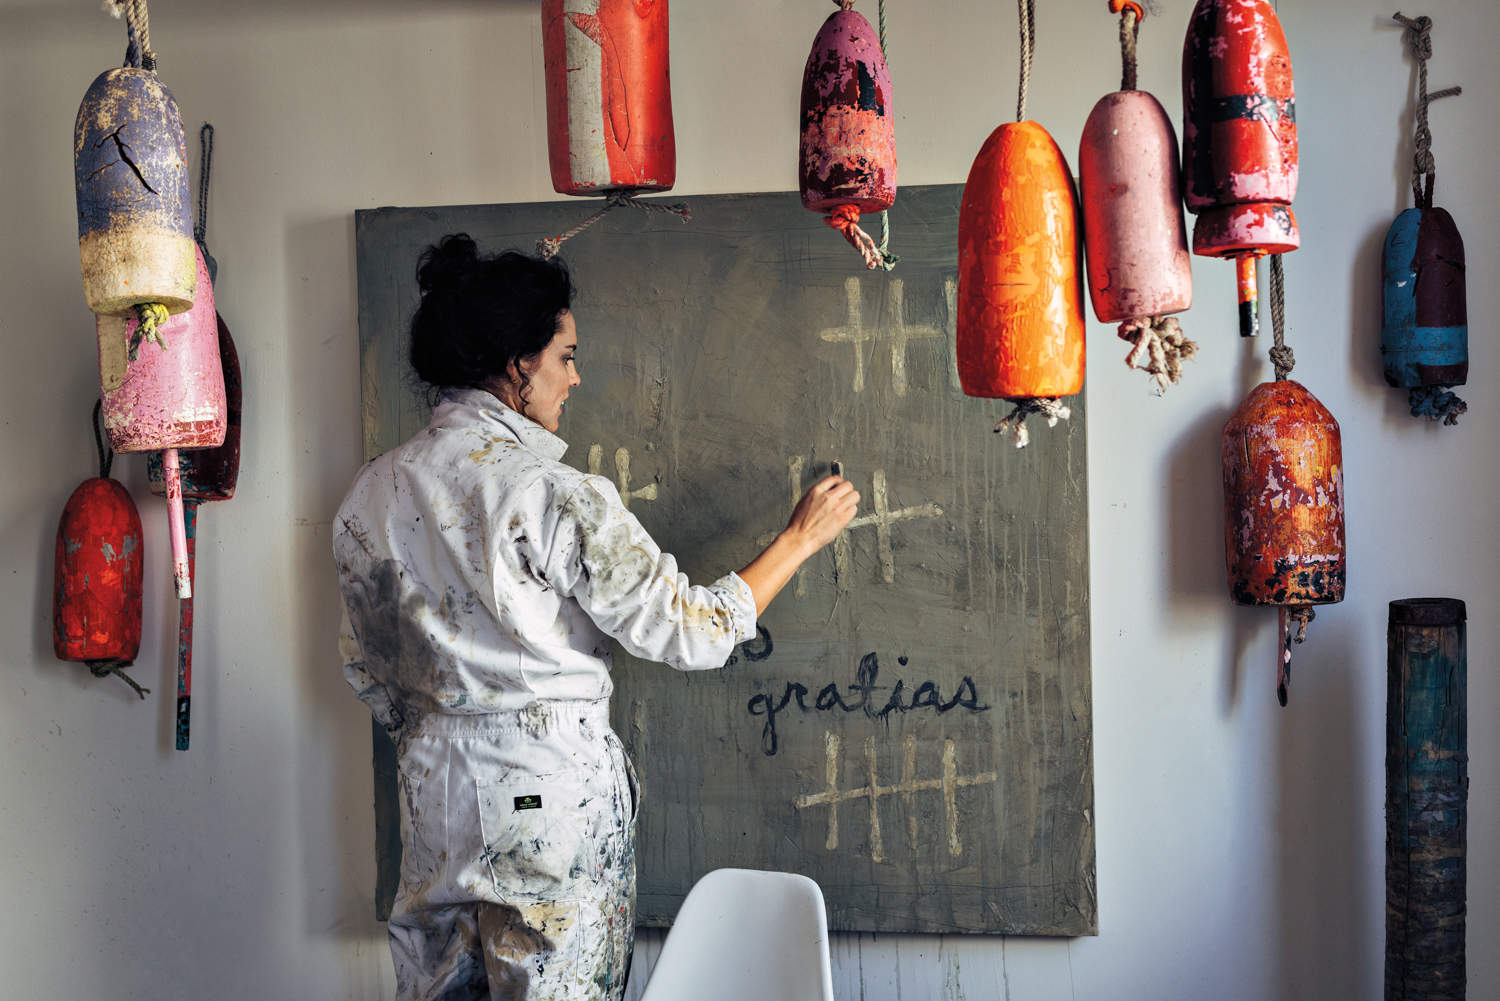 Woman standing before a canvas with tools; brightly colored objects dangle from the ceiling in the foreground